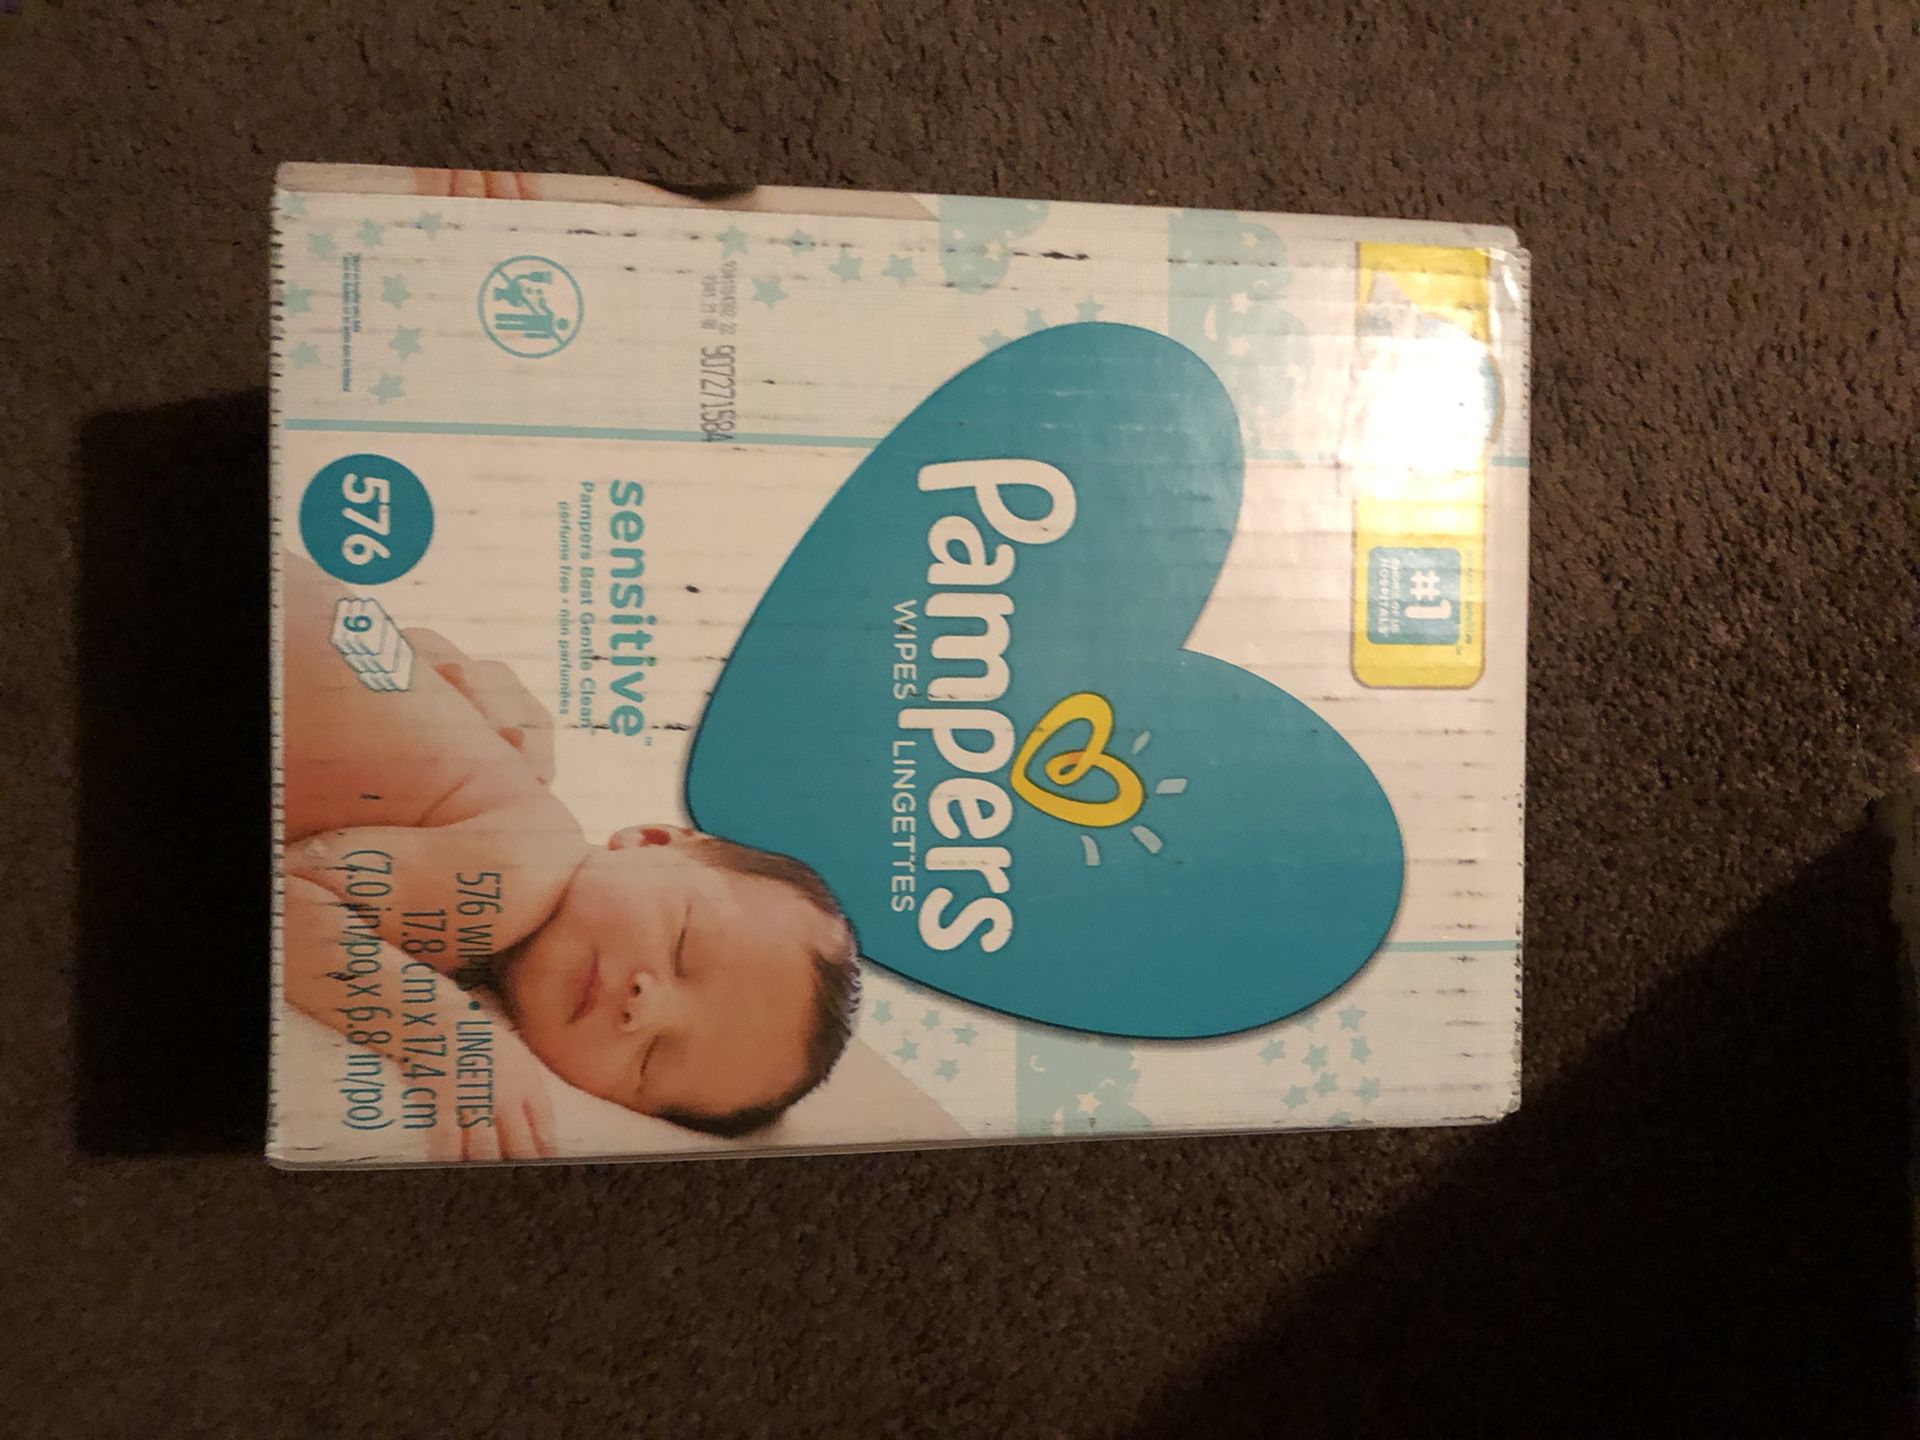 Sensitive pampers wipes